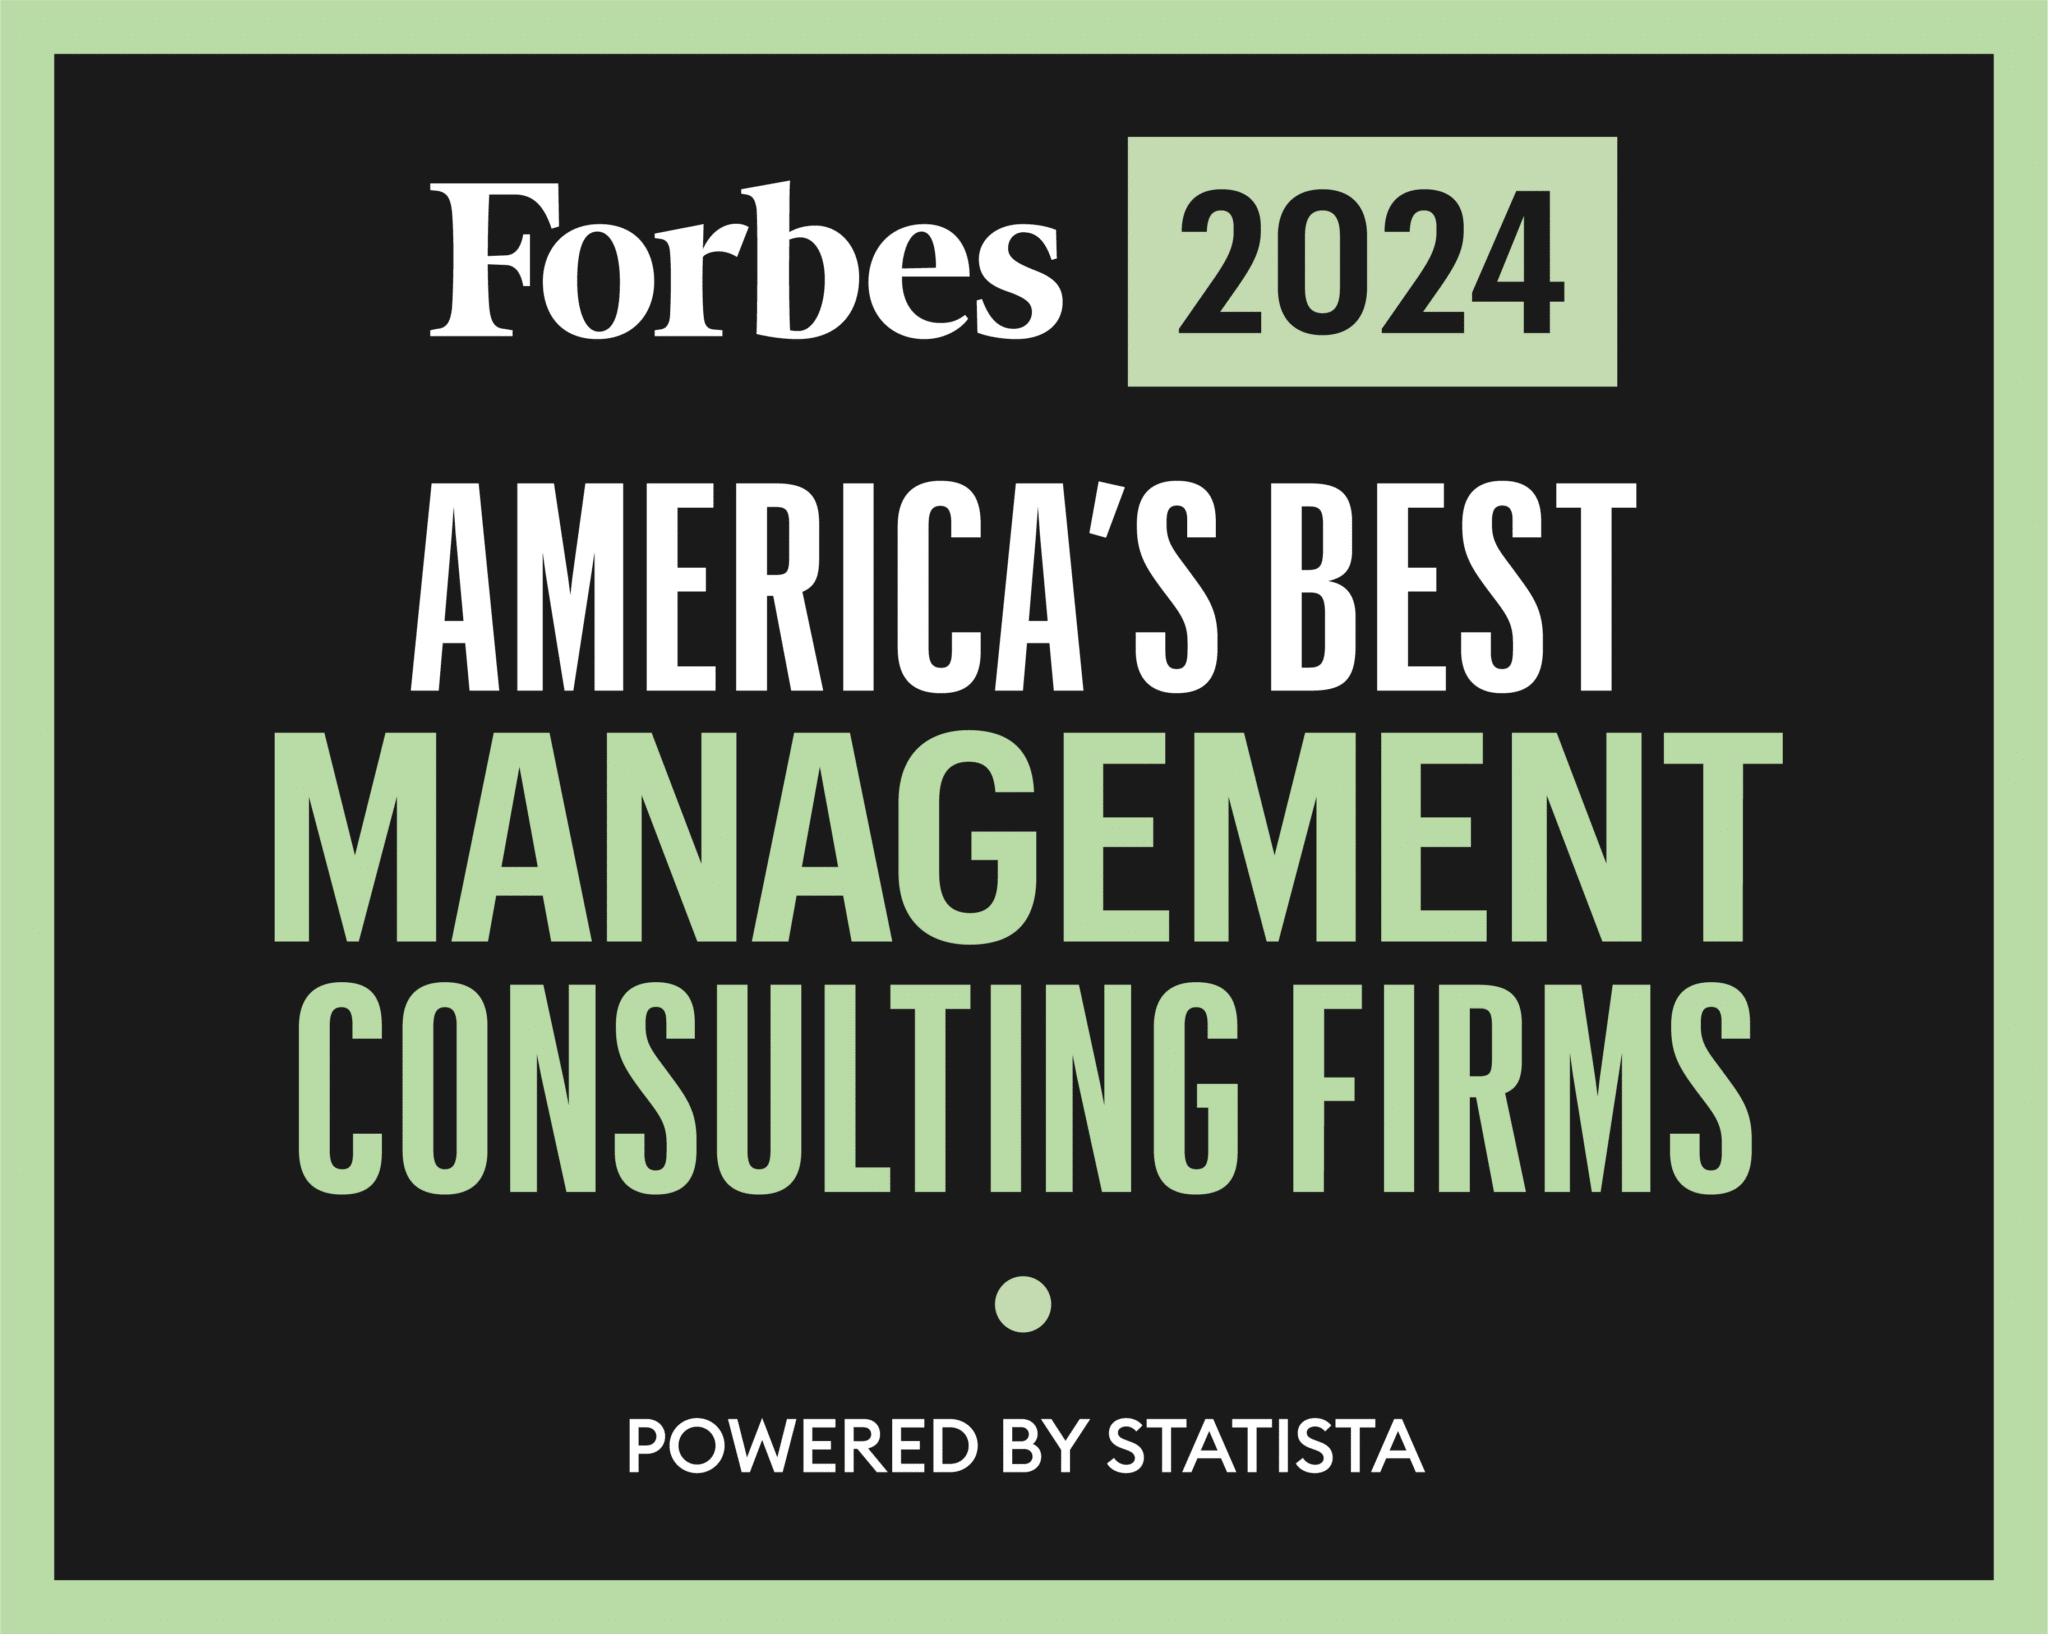 Forbes America's Best Management Consulting Firms 2024 award